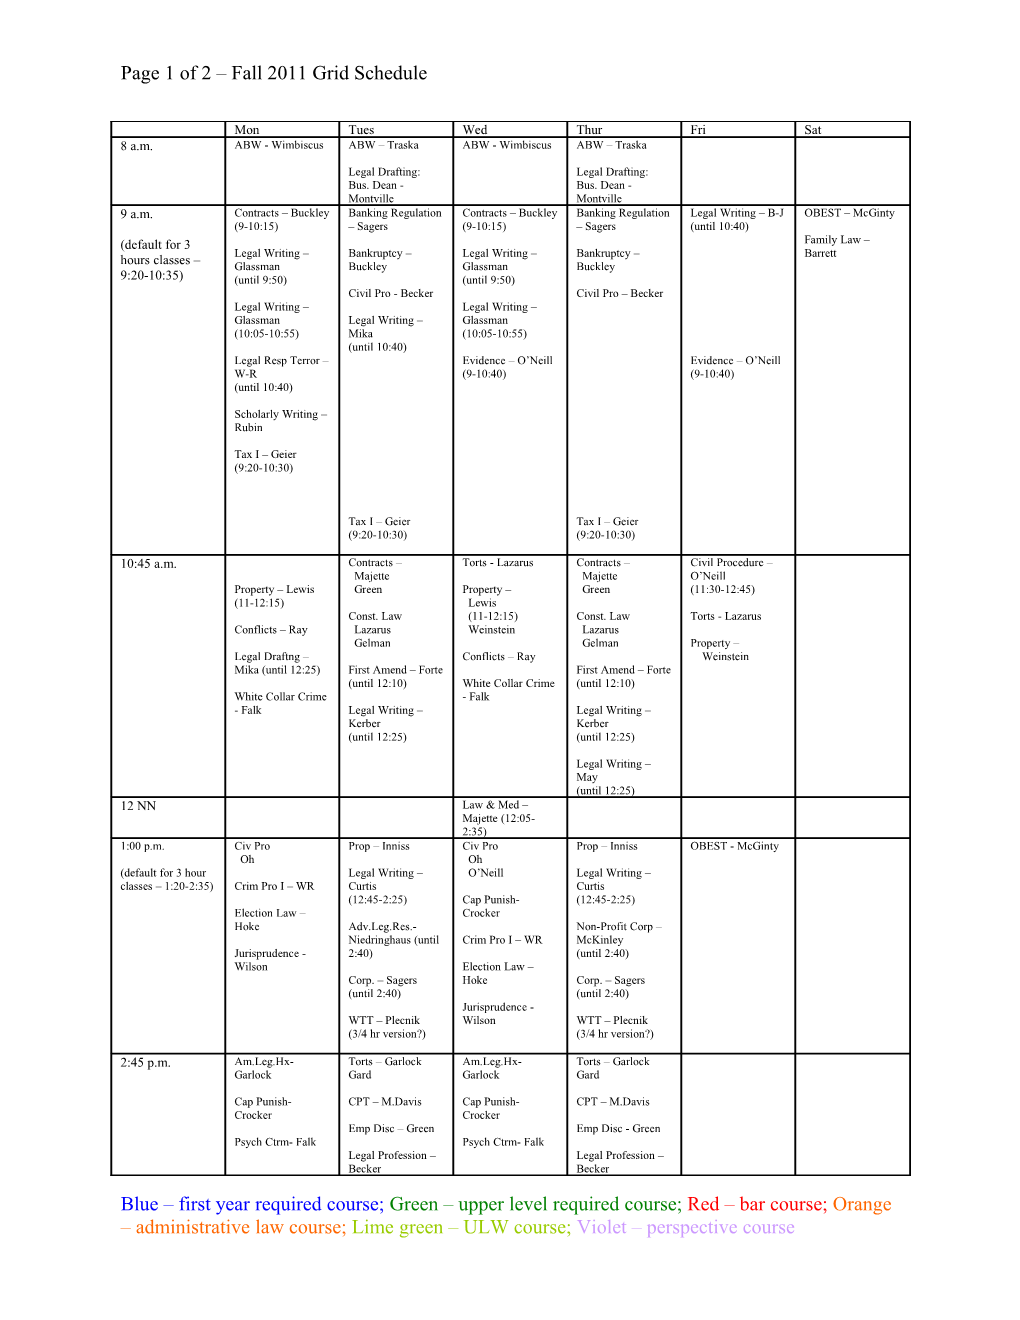 Page 1 of 2 Fall 2011 Grid Schedule